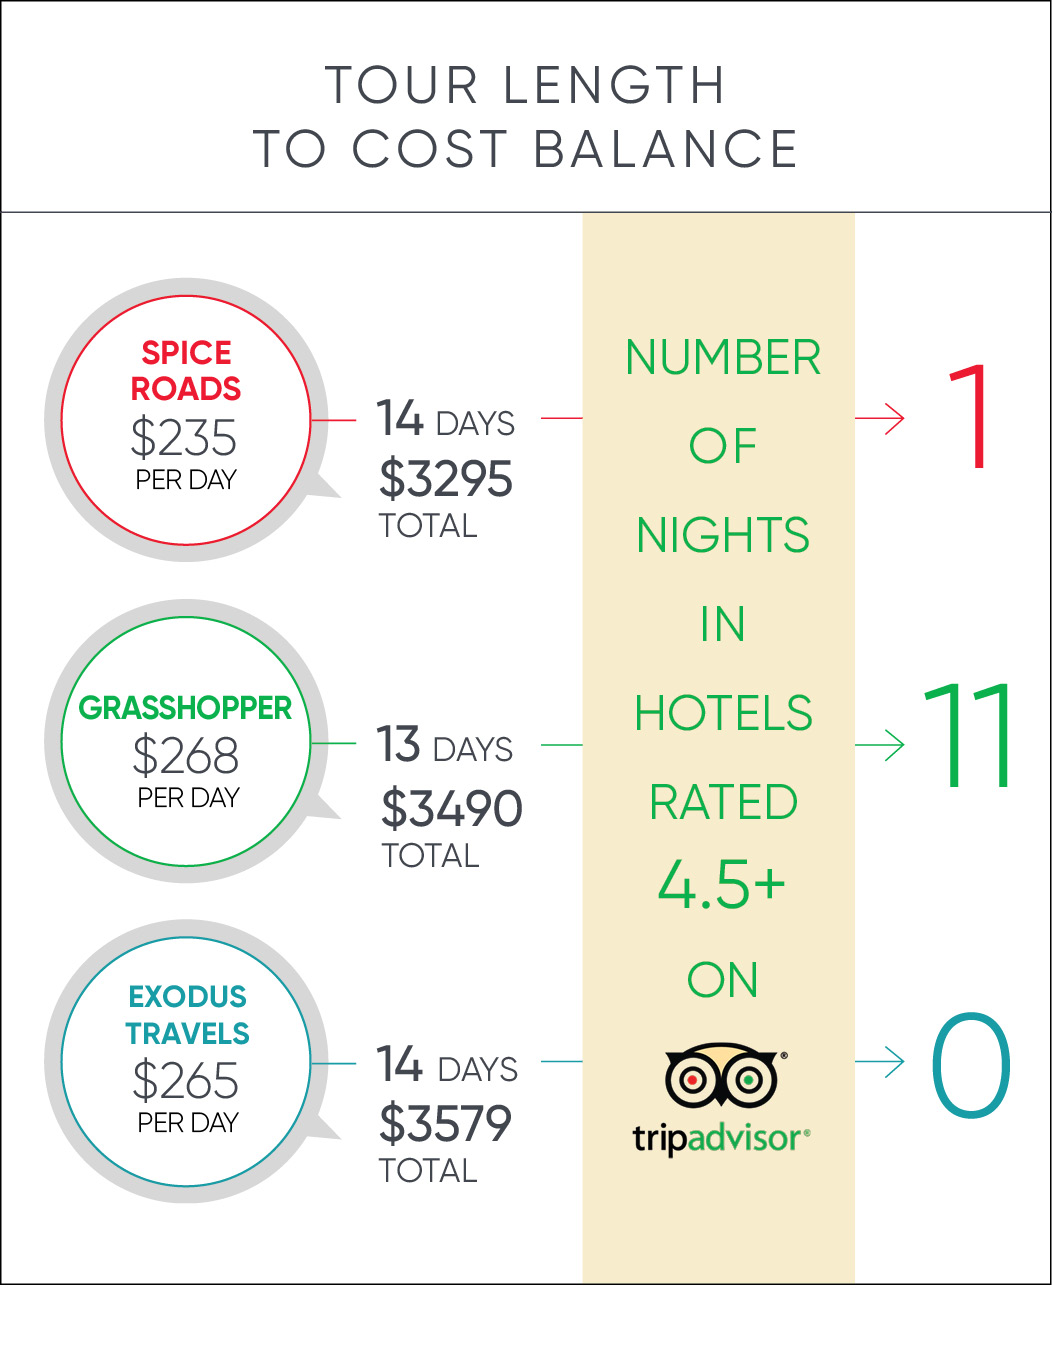 tour cost balance compare infographic